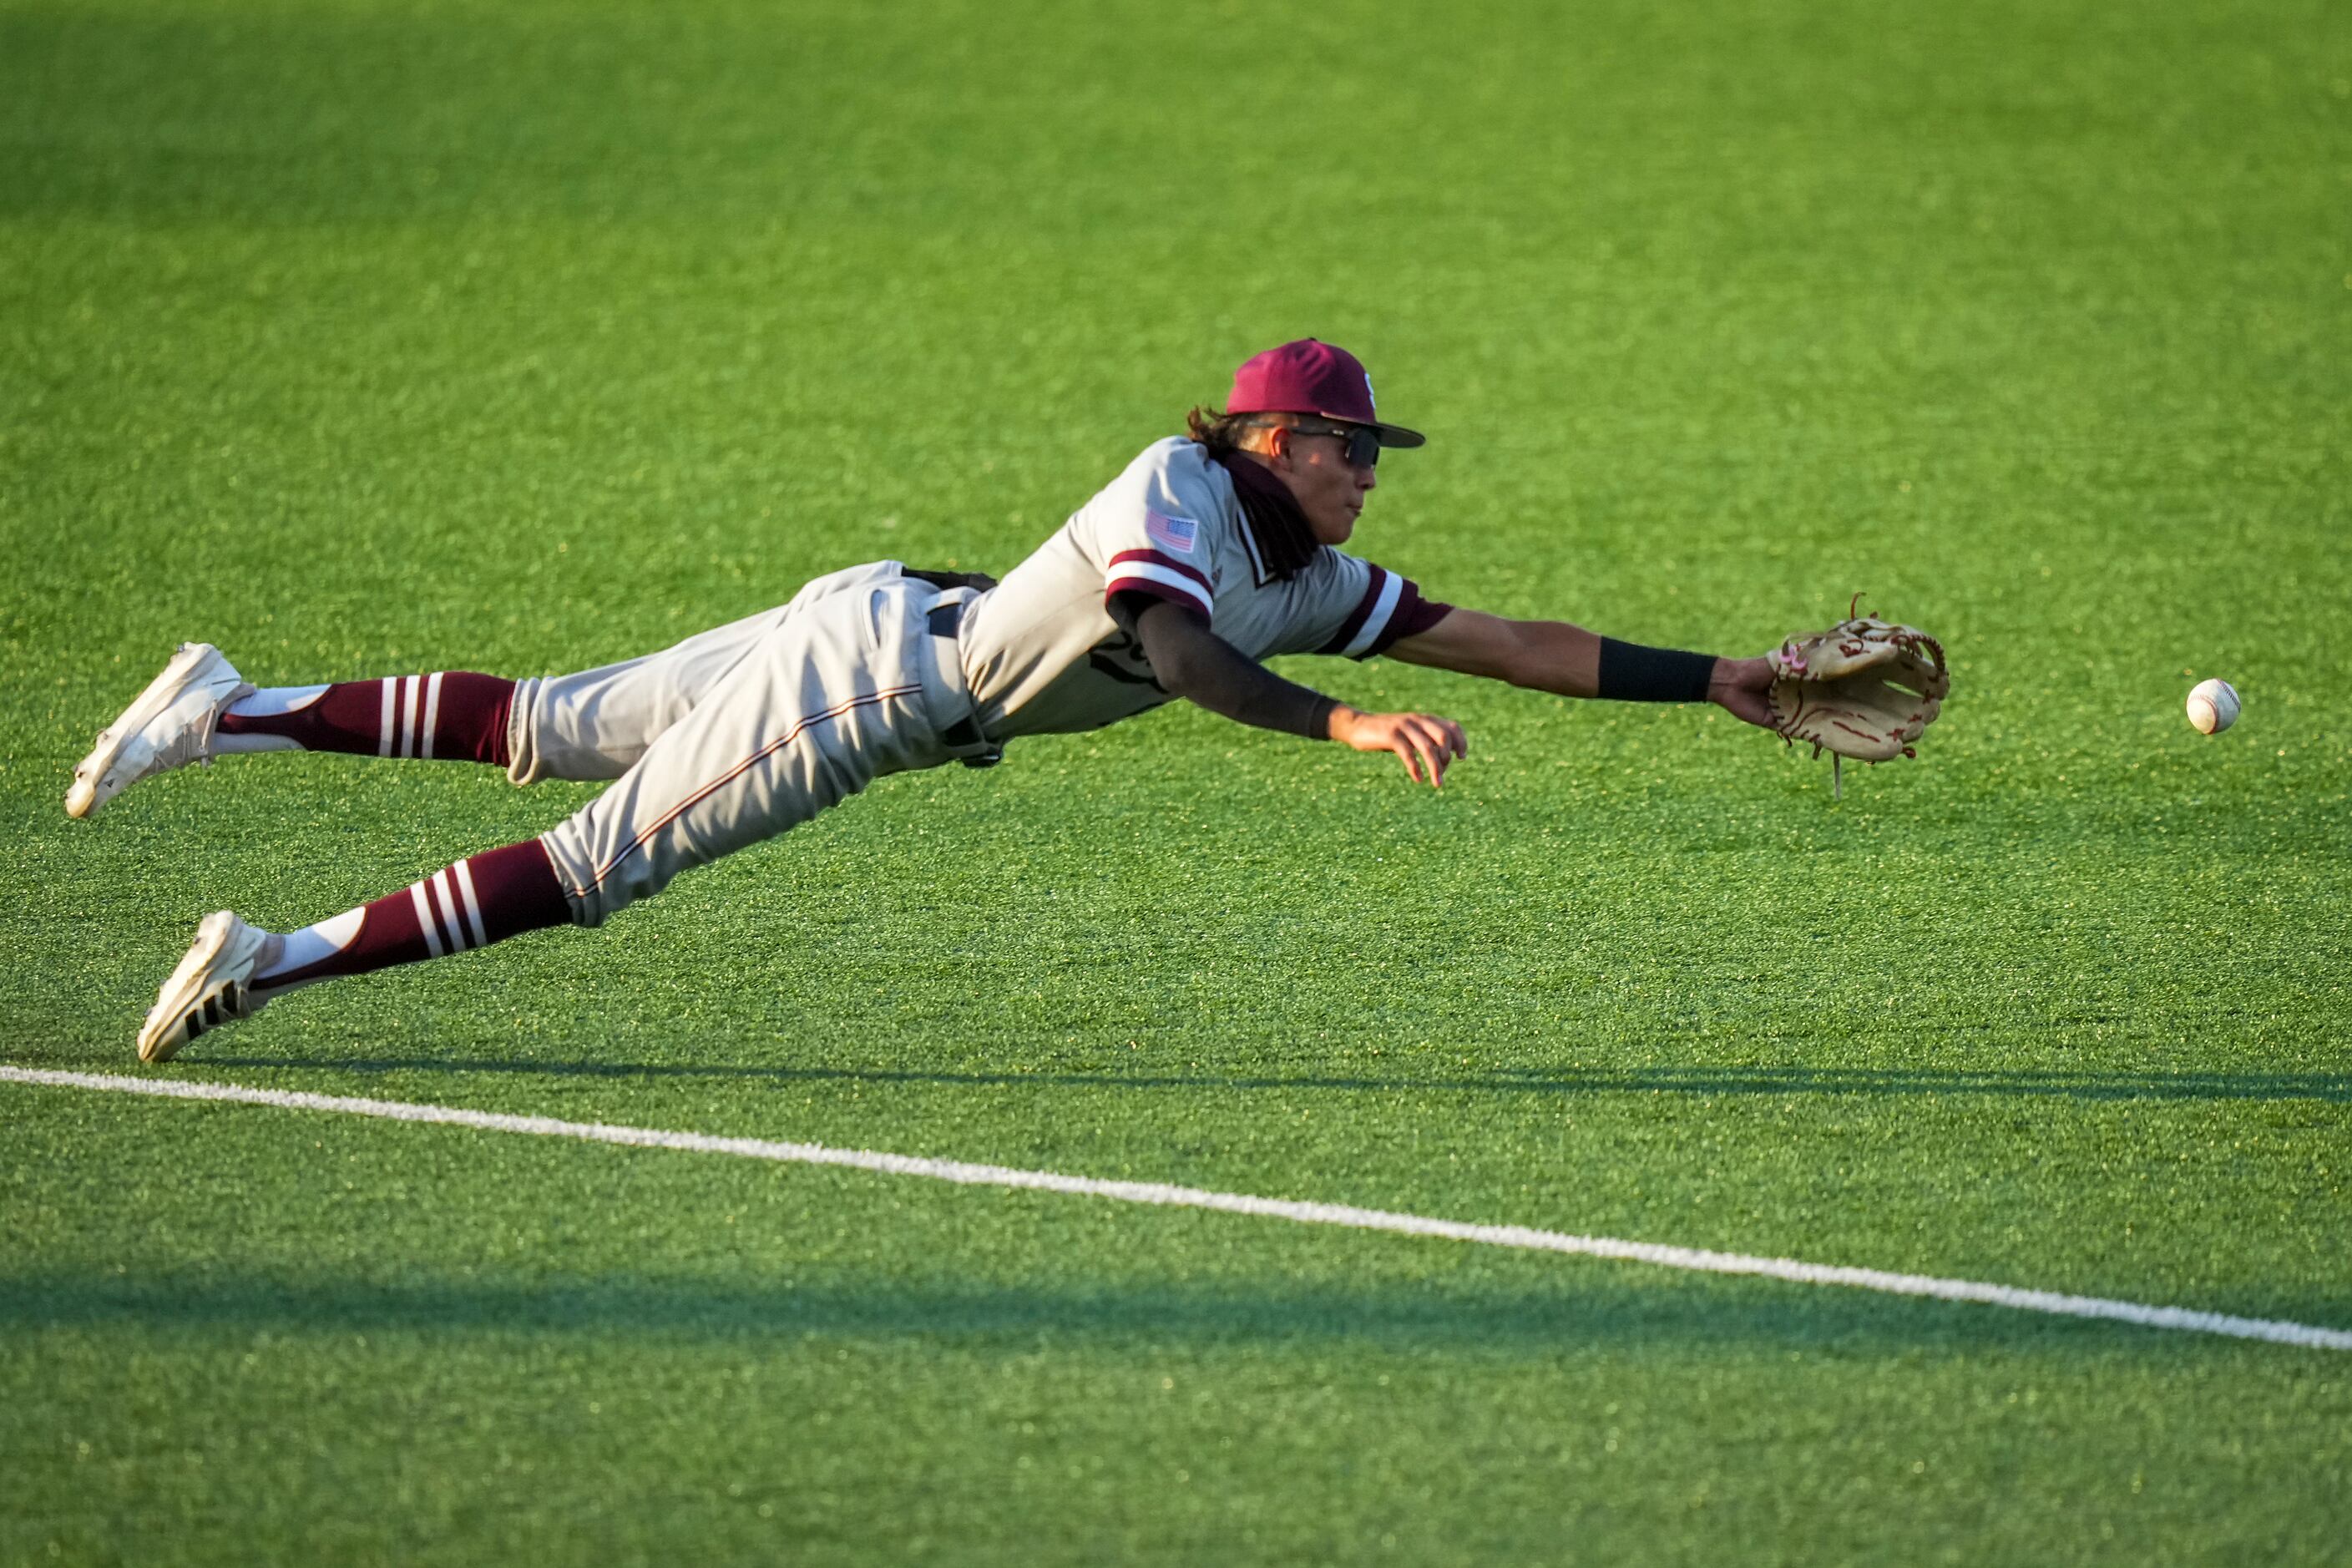 Sinton second baseman Marco Gonzales can’t make a diving play on a single by Argyle...